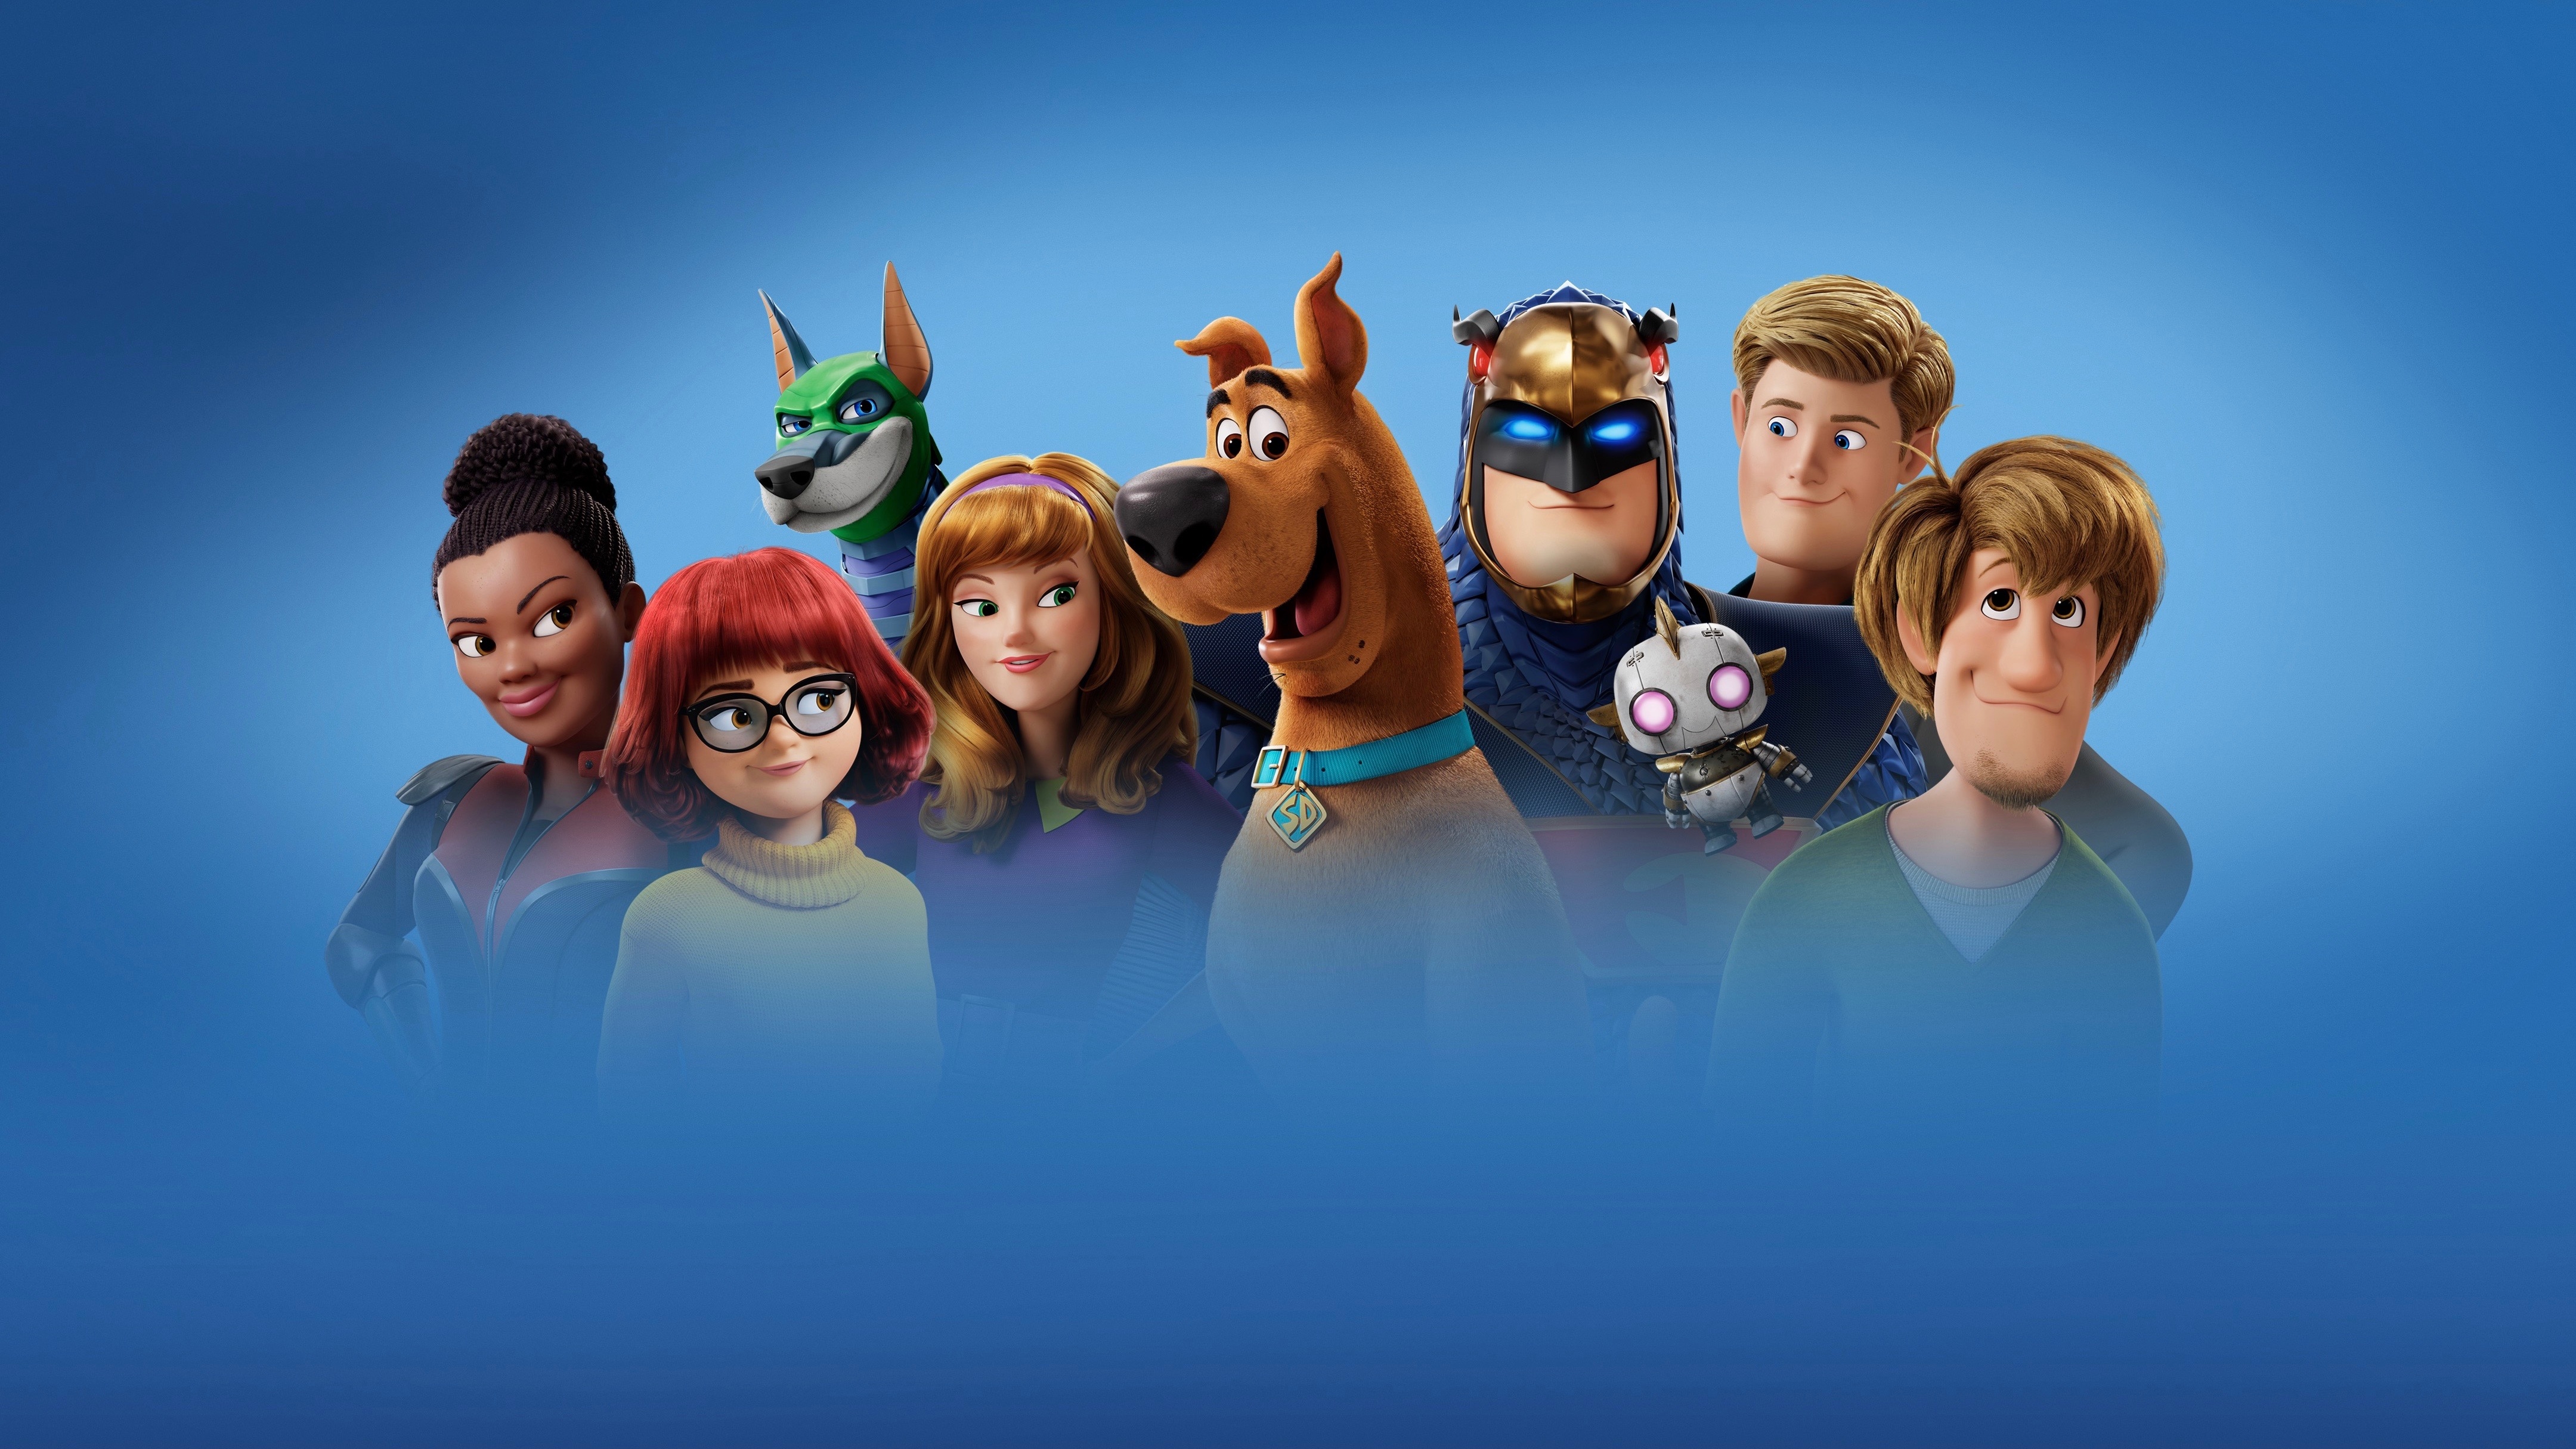 HD wallpaper, Scooby Doo, Animation Movies, 2020